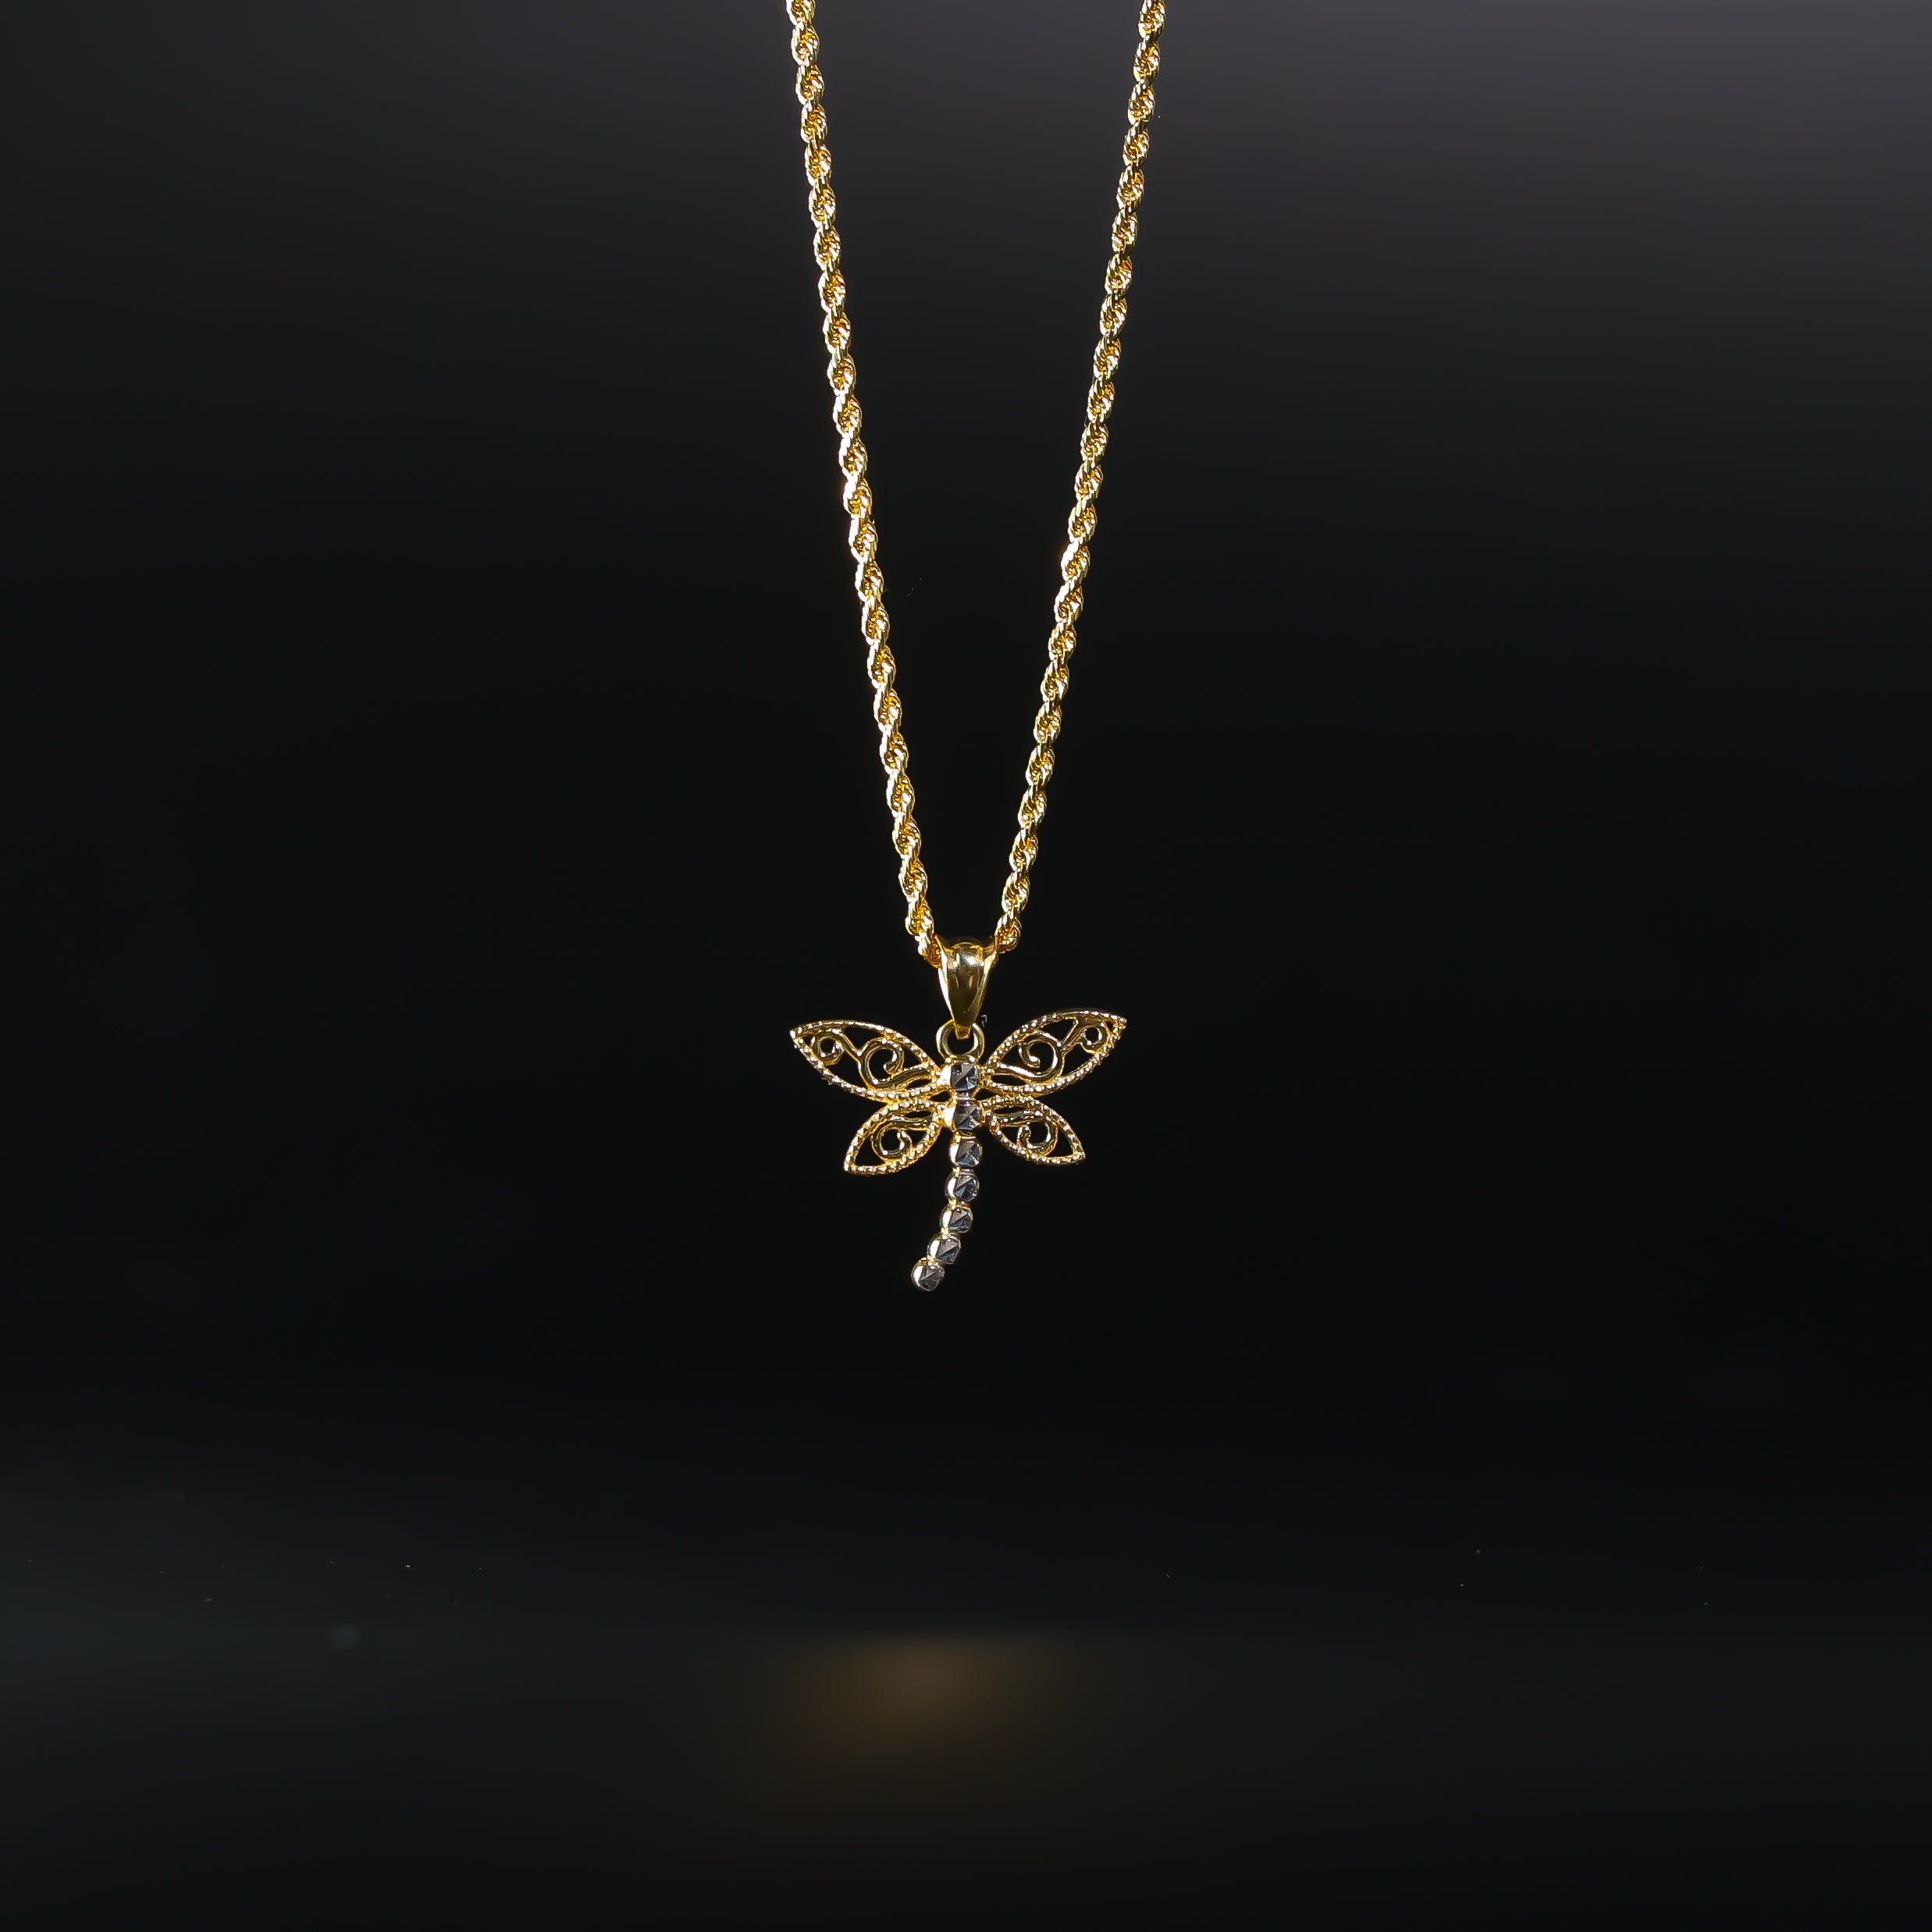 Gold Dragon Fly Heart Pendant Model-2359 - Charlie & Co. Jewelry